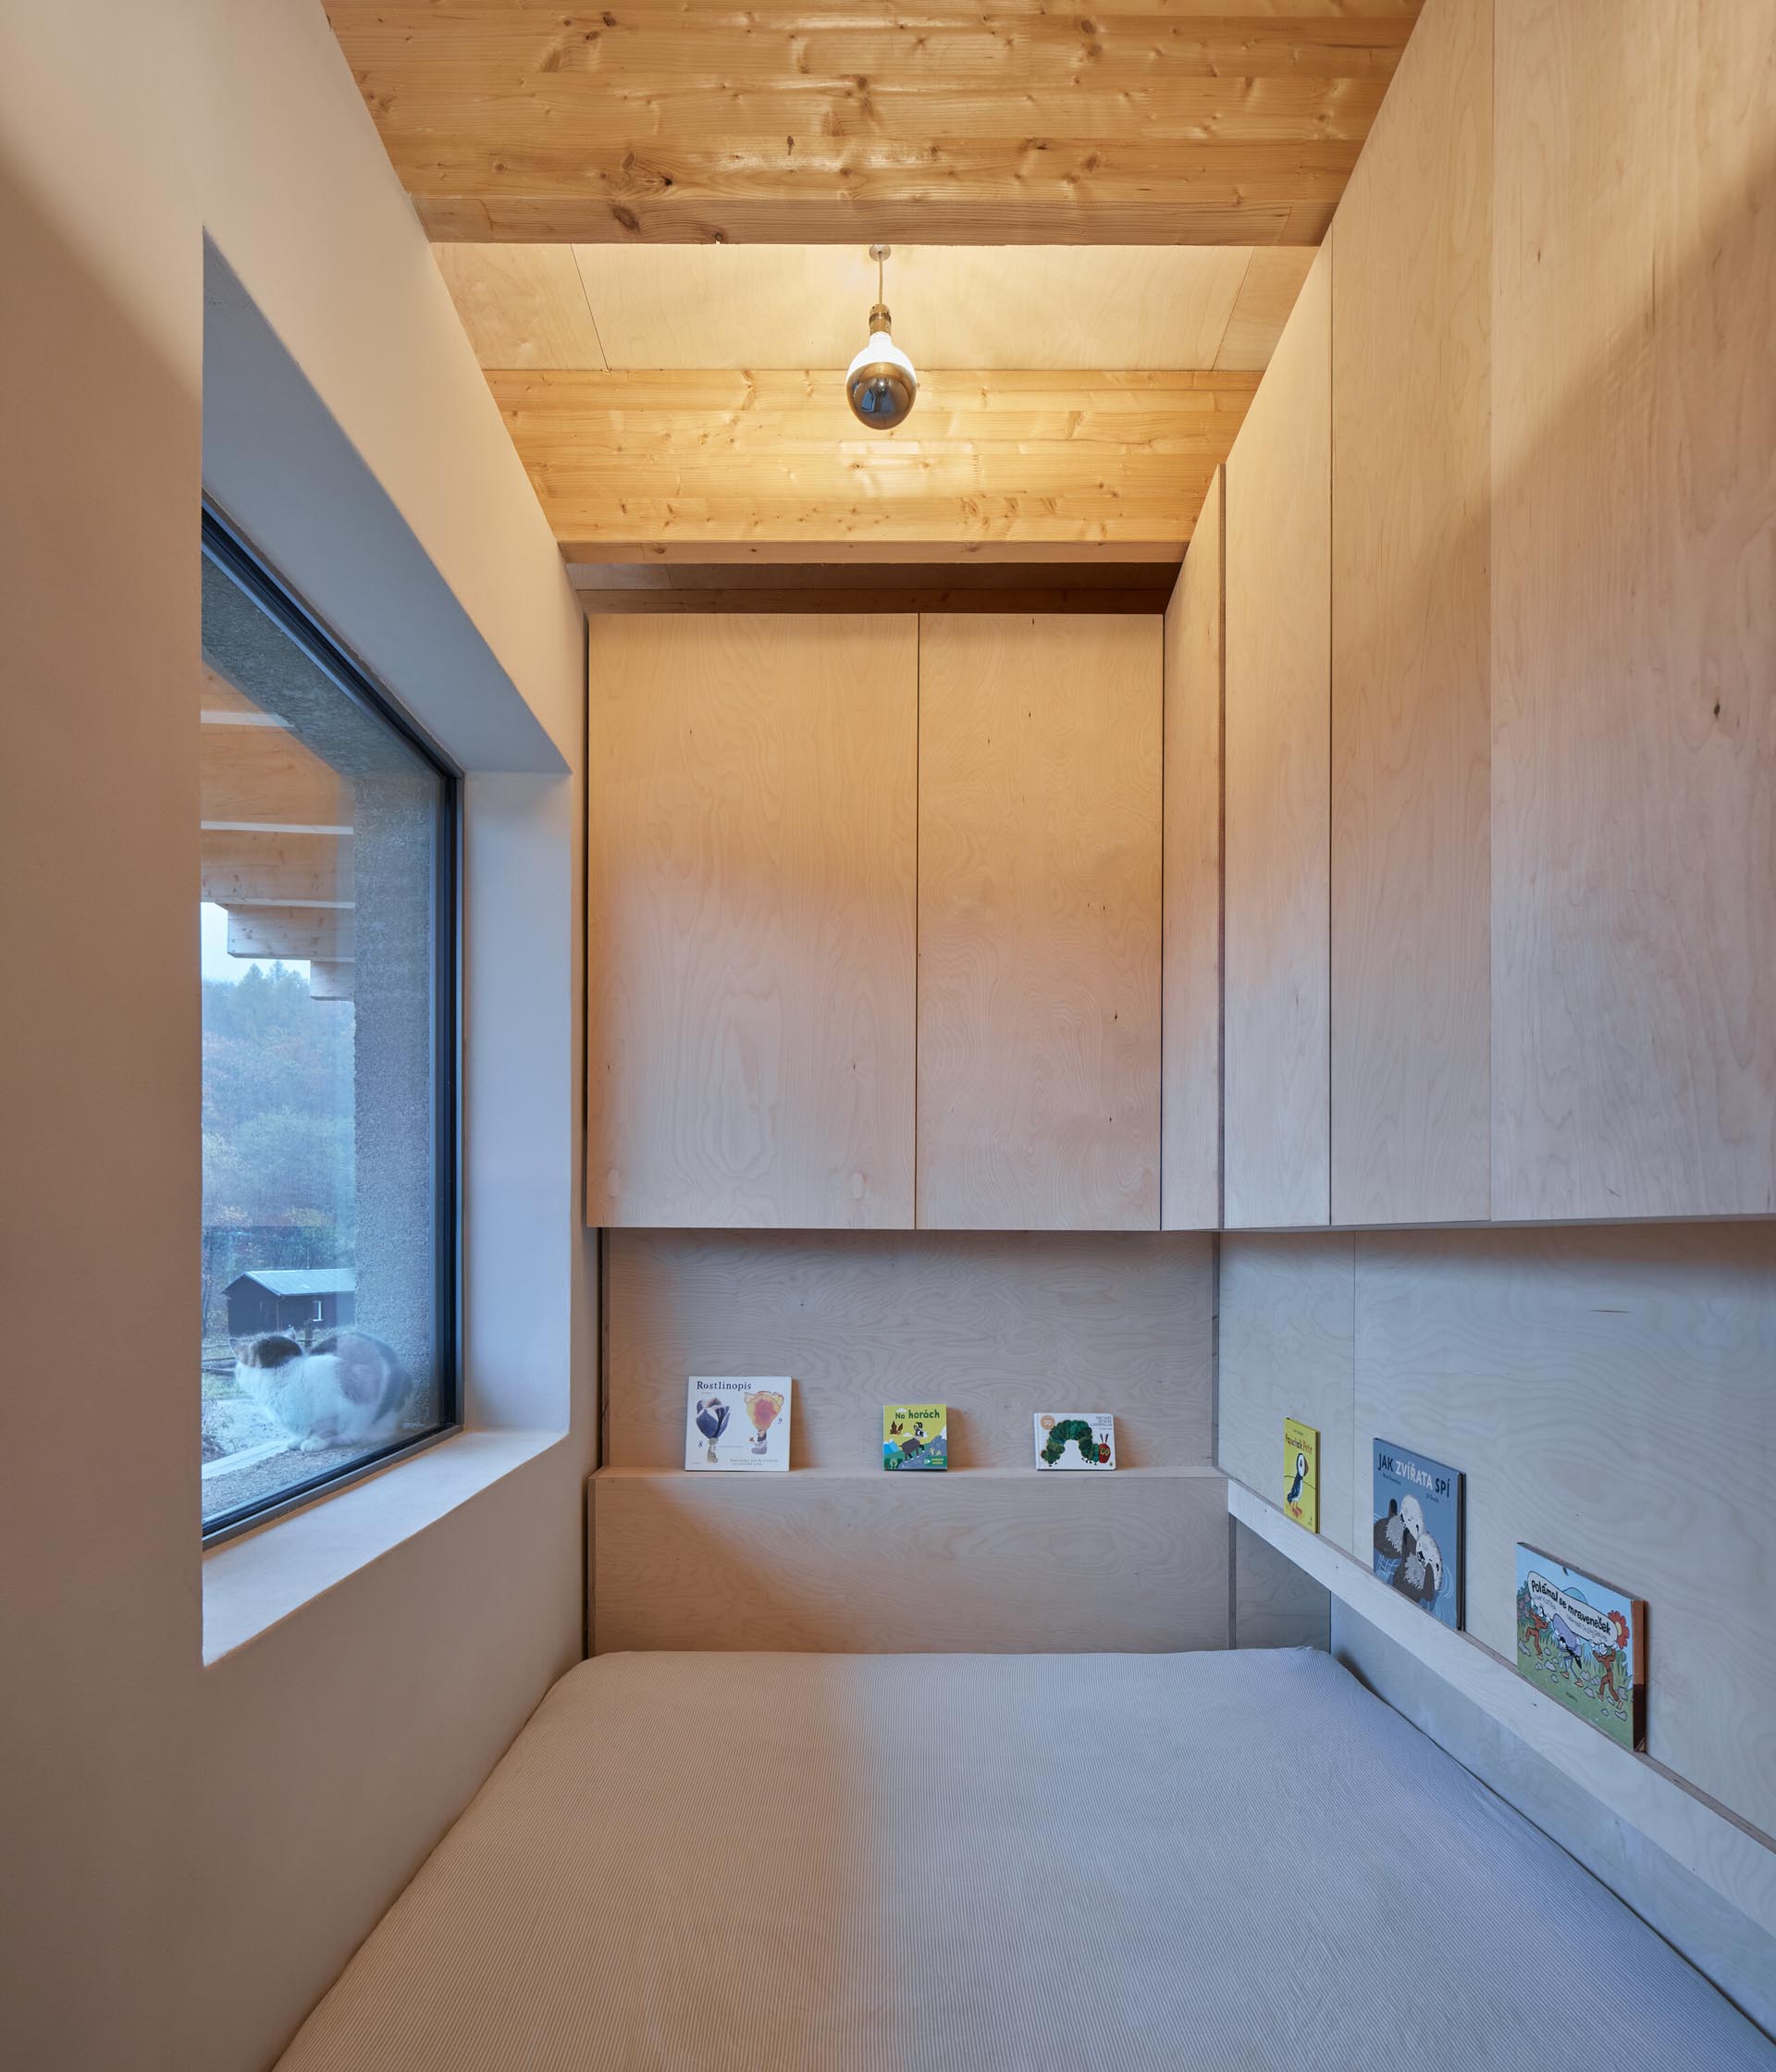 In this child's bedroom, there's a small wood ledge for holding books.